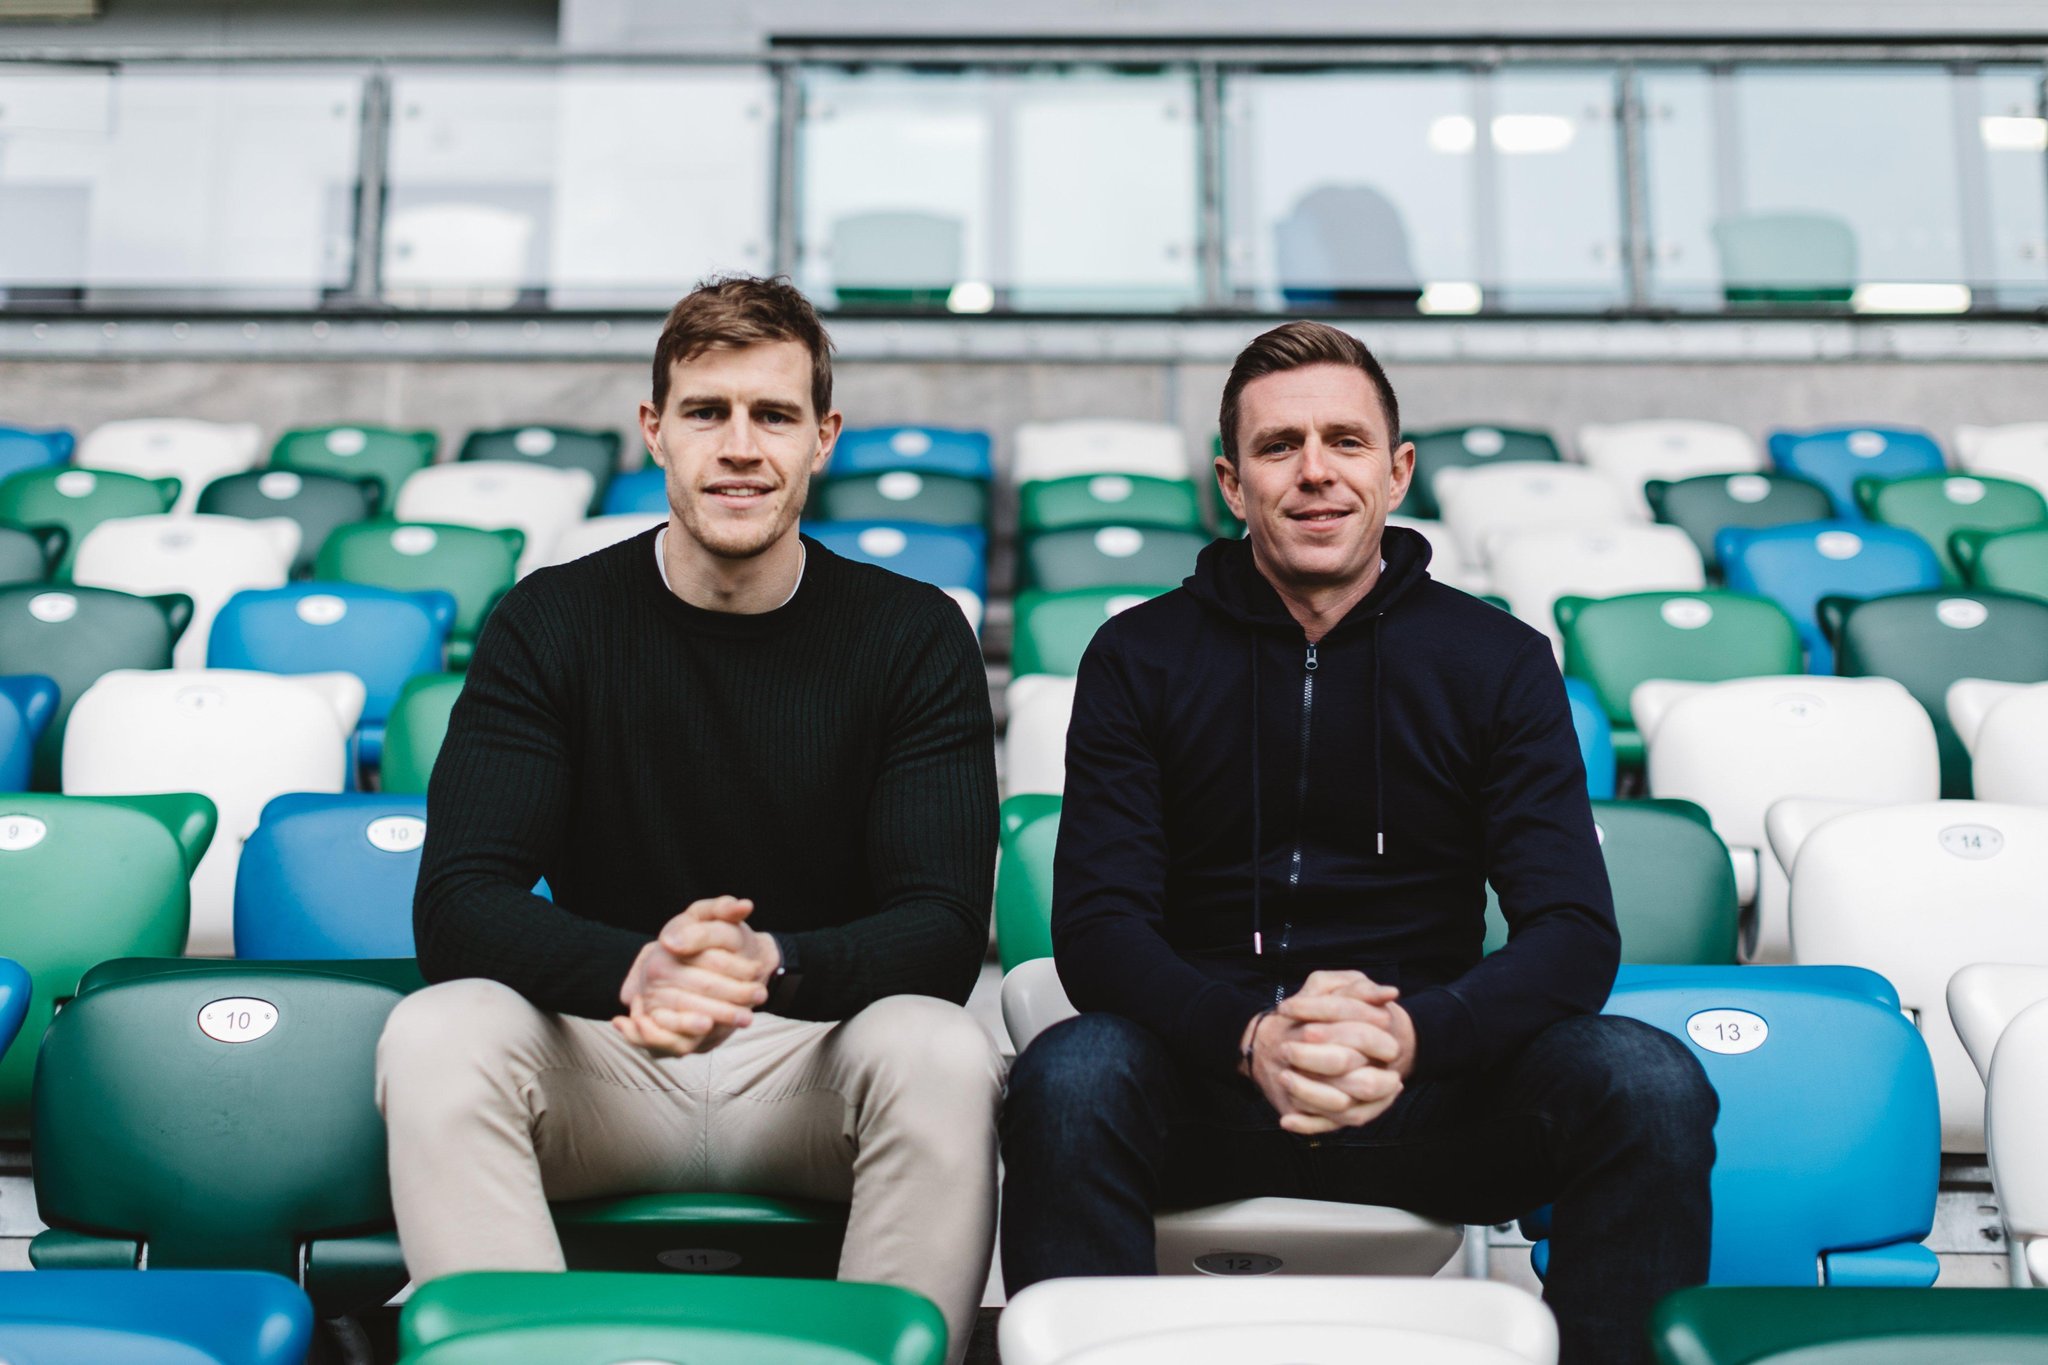 Andrew Trimble's firm Kairos puts safety and wellbeing of young people first